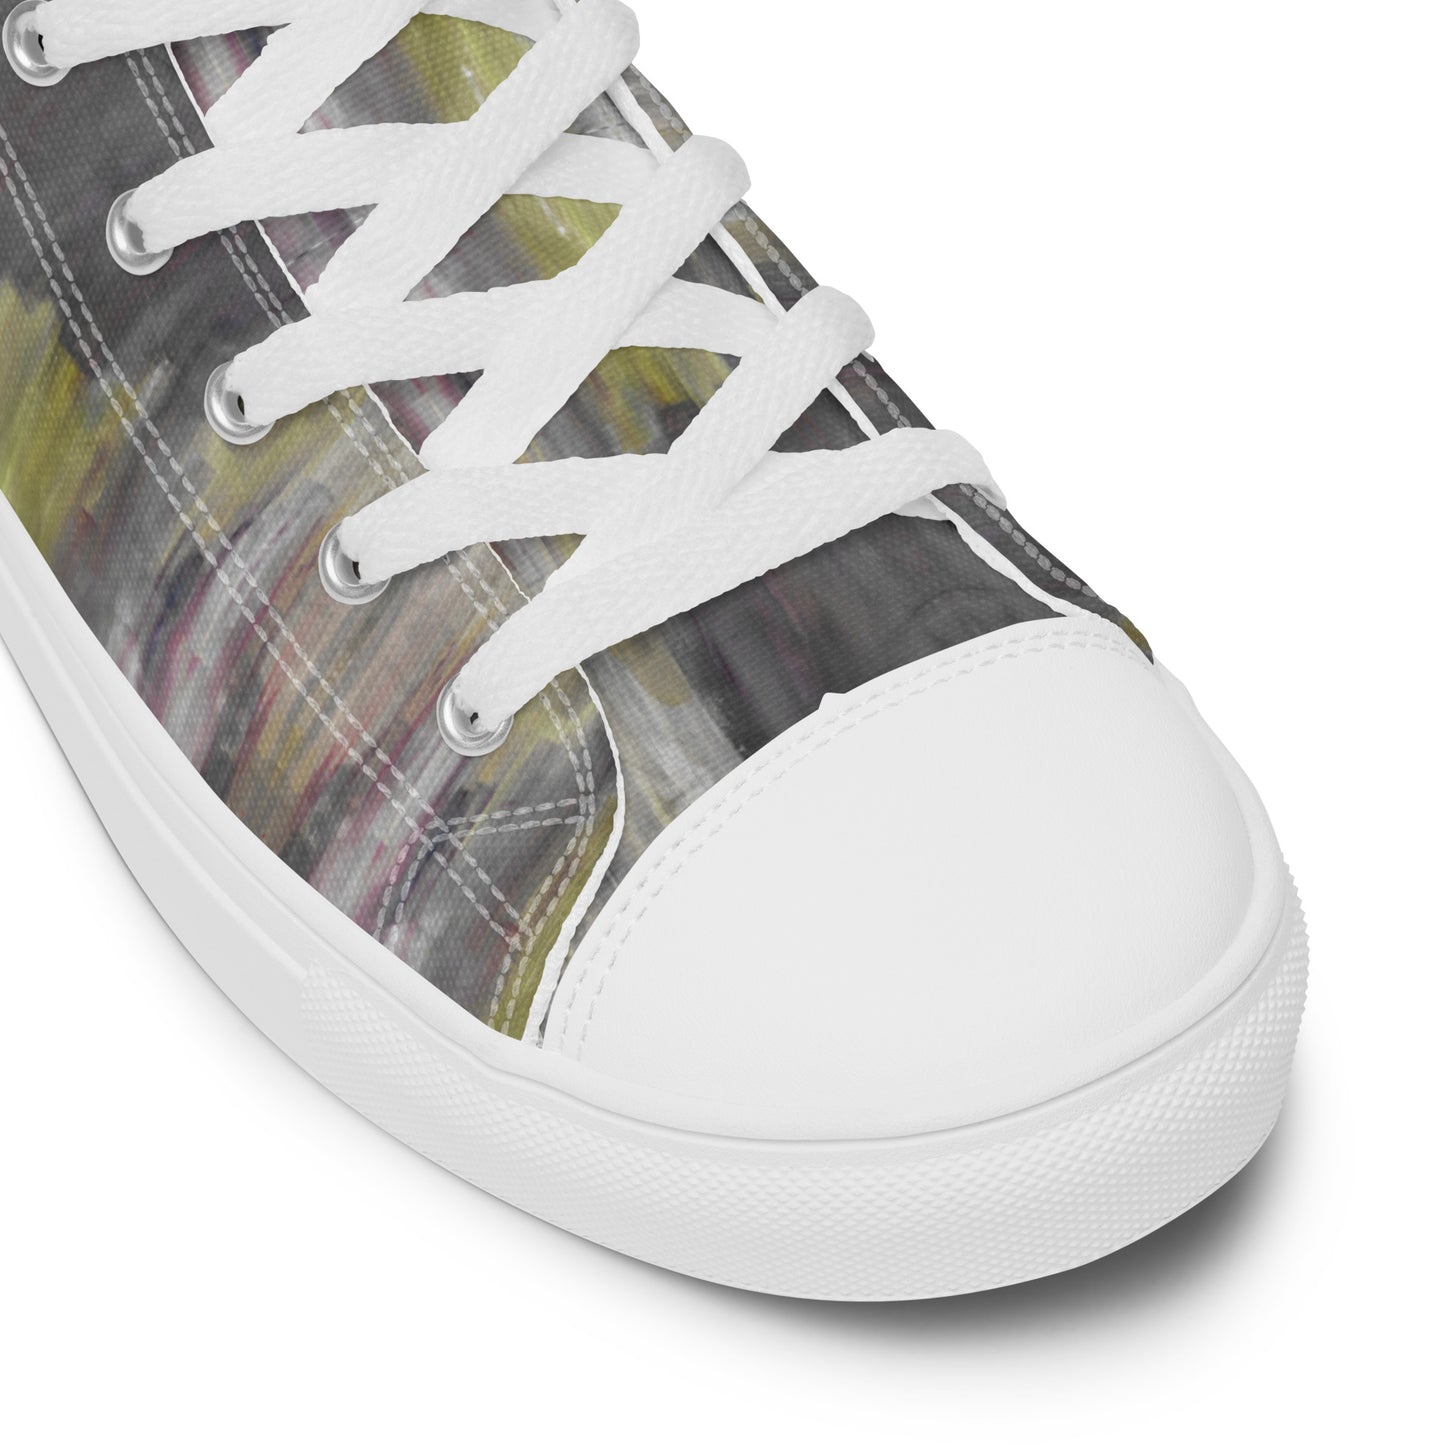 MERCURE - Women's high-top canvas trainers